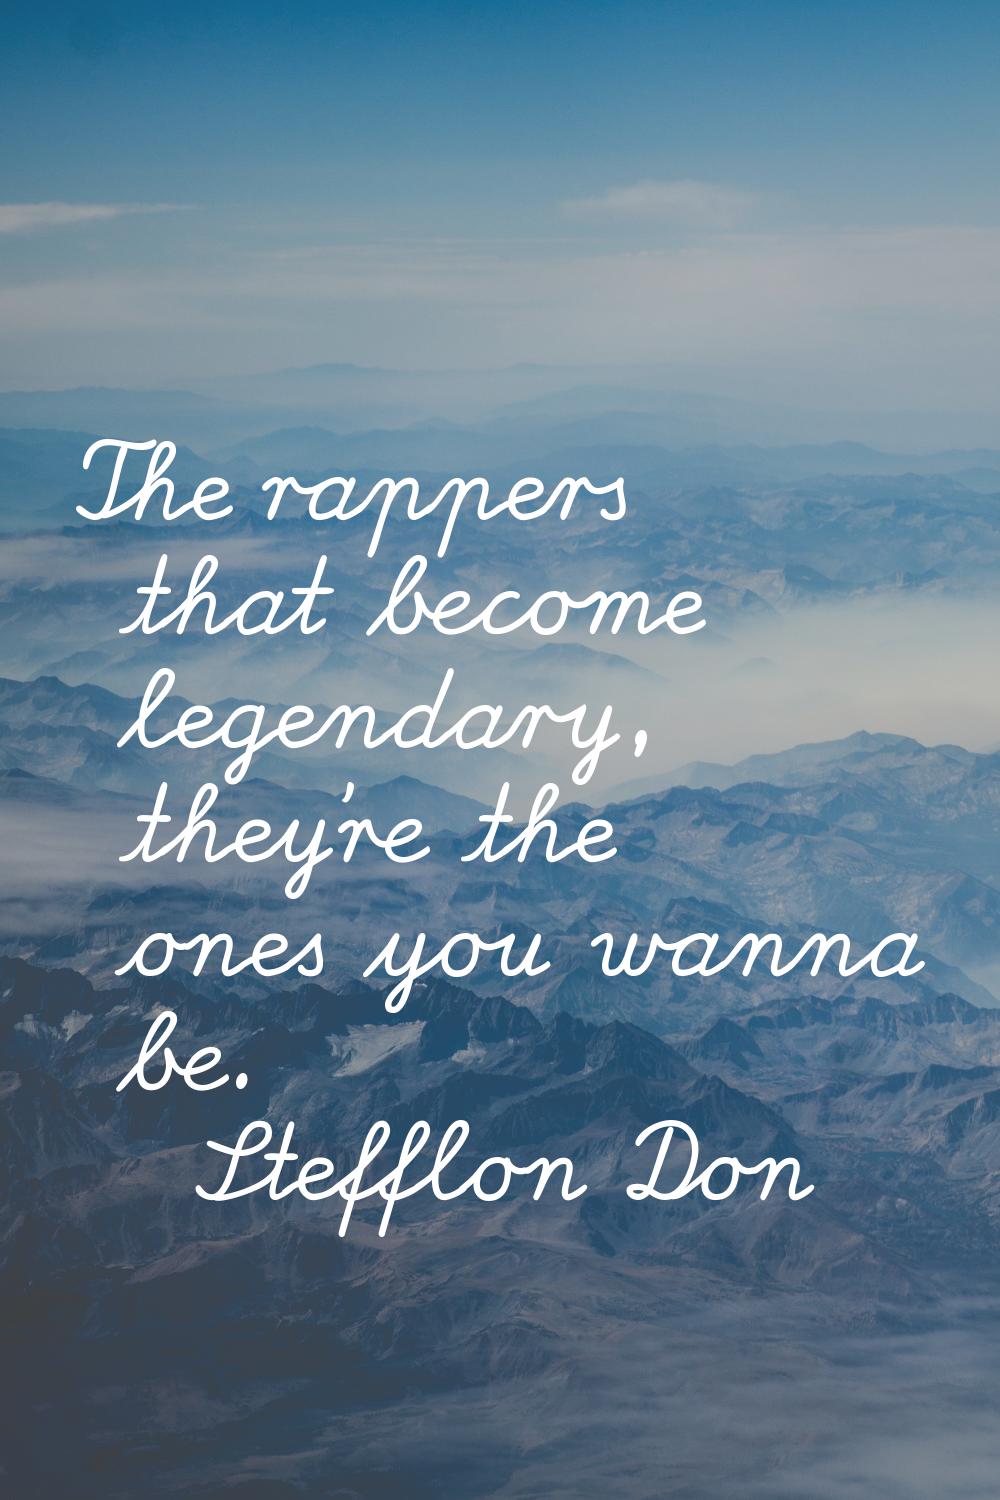 The rappers that become legendary, they're the ones you wanna be.